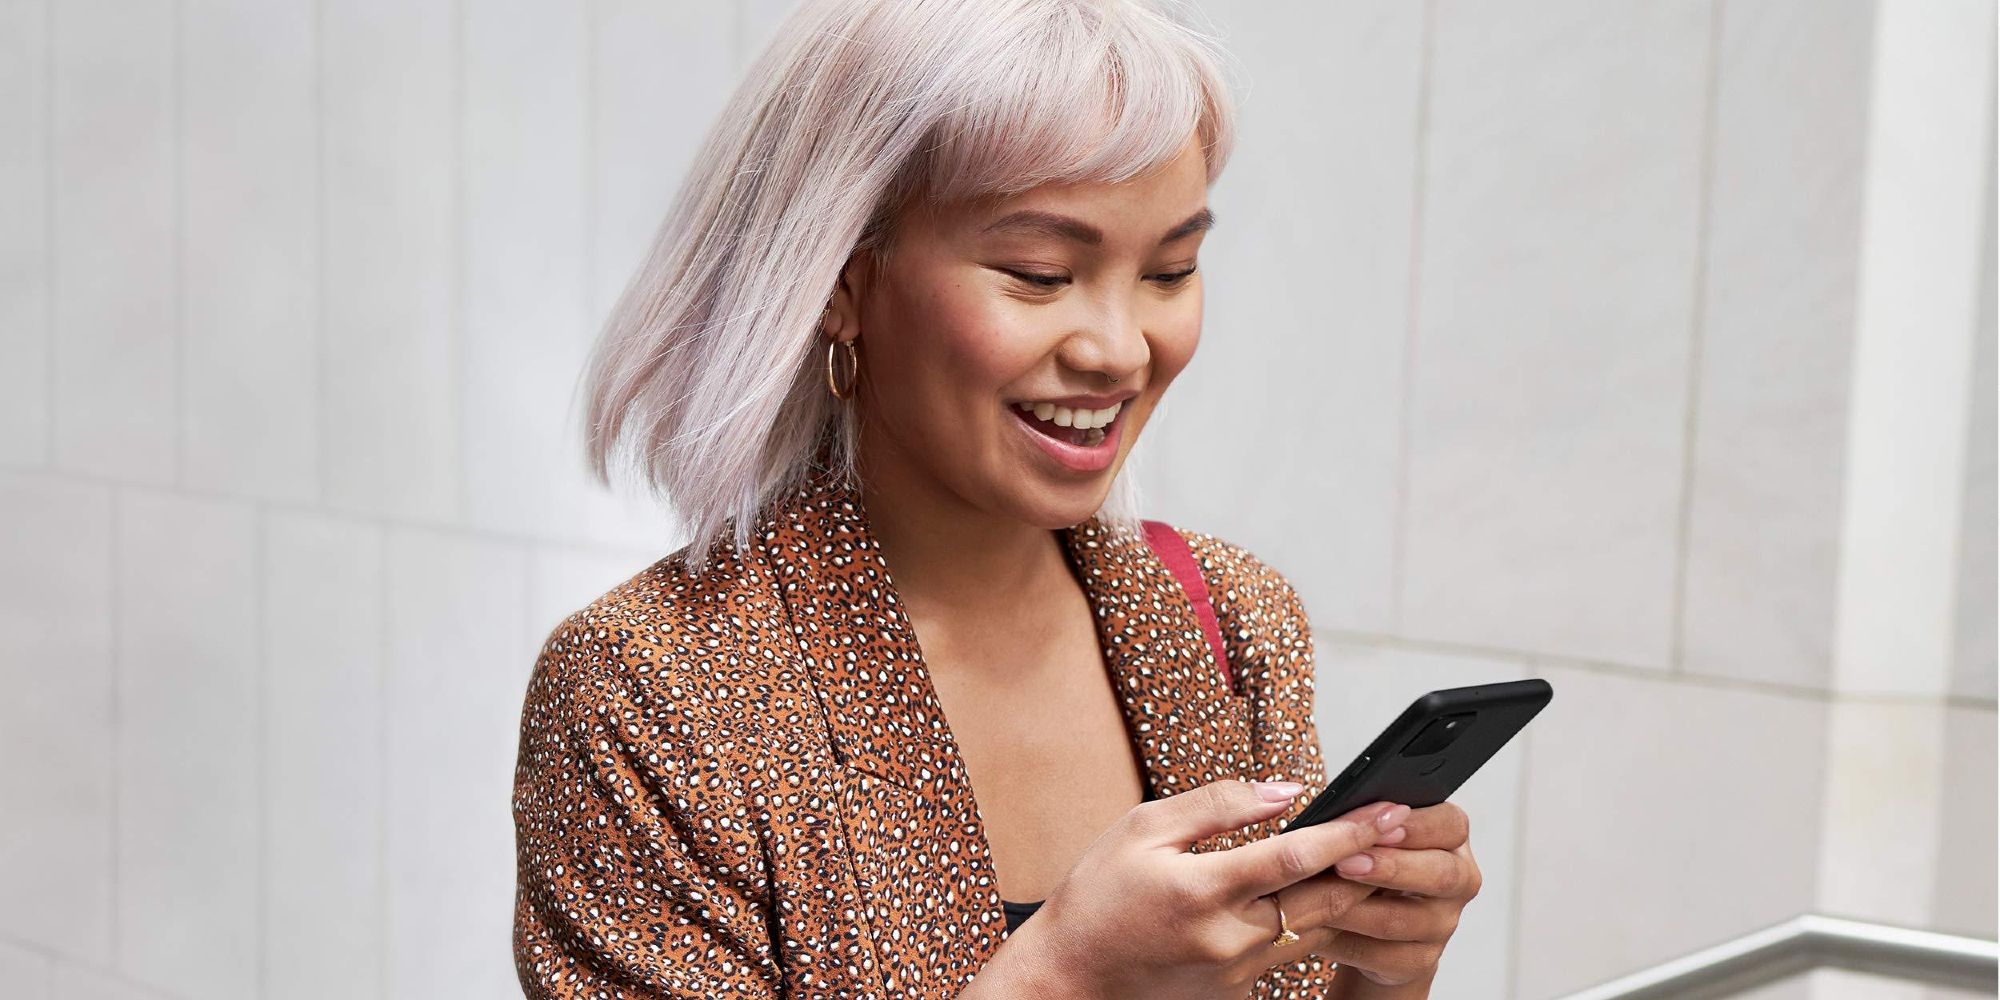 Woman smiling while using a Google Pixel 5